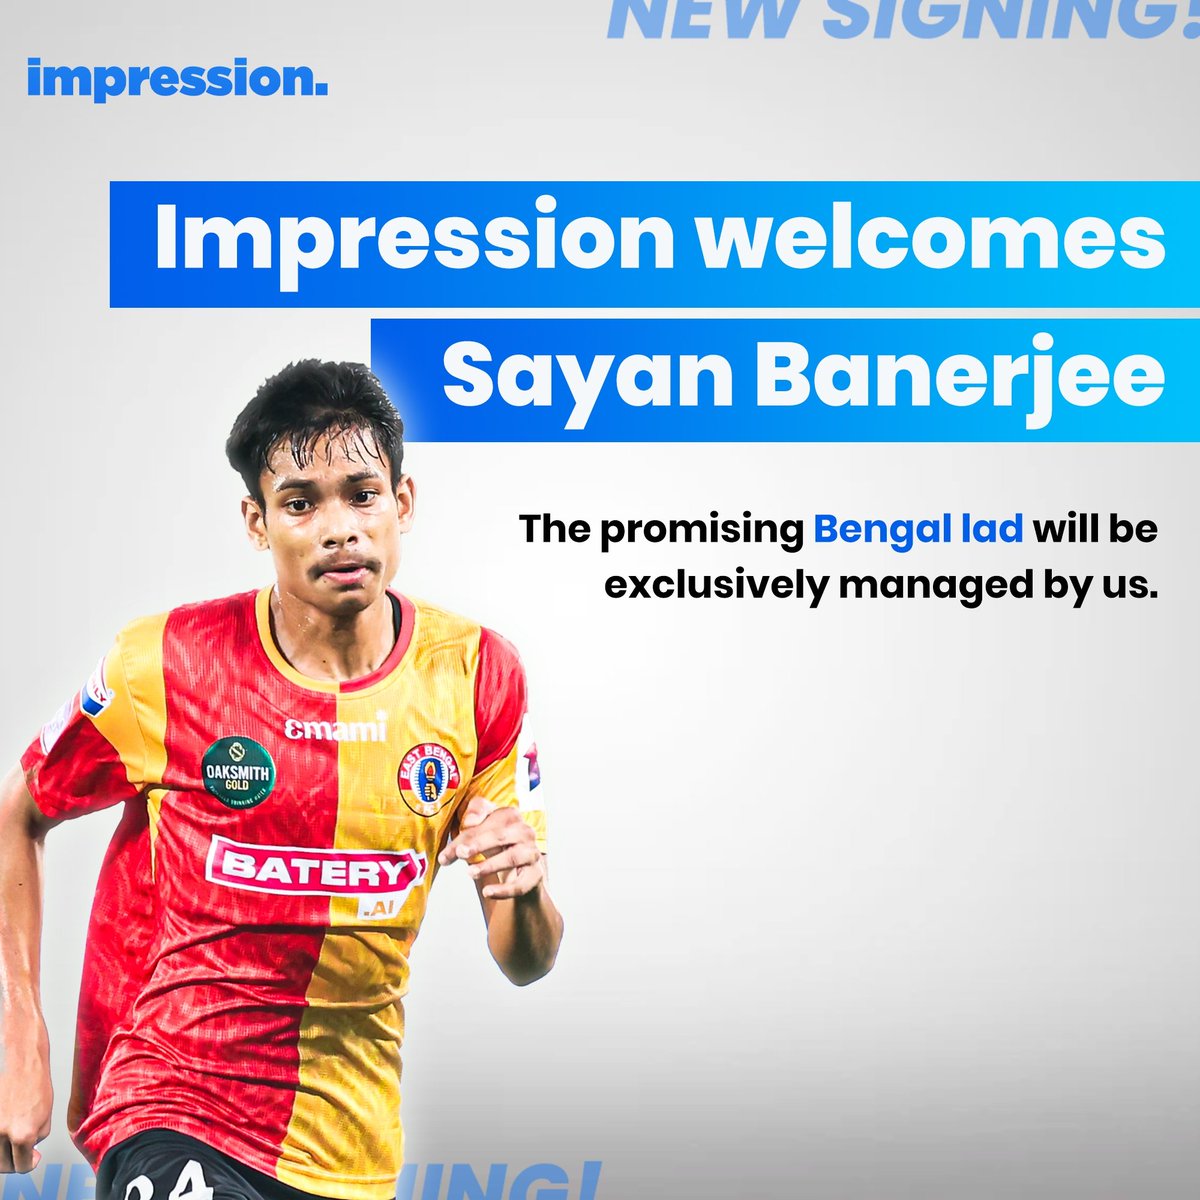 🤩 We are elated to announce that promising East Bengal FC winger Sayan Banerjee has joined Impression.✍️

The Bengal lad made his debut for East Bengal in the ISL this season. Sayan played a pivotal role in the torch bearer’s recent Super Cup triumph.

#ImpressionAthlete